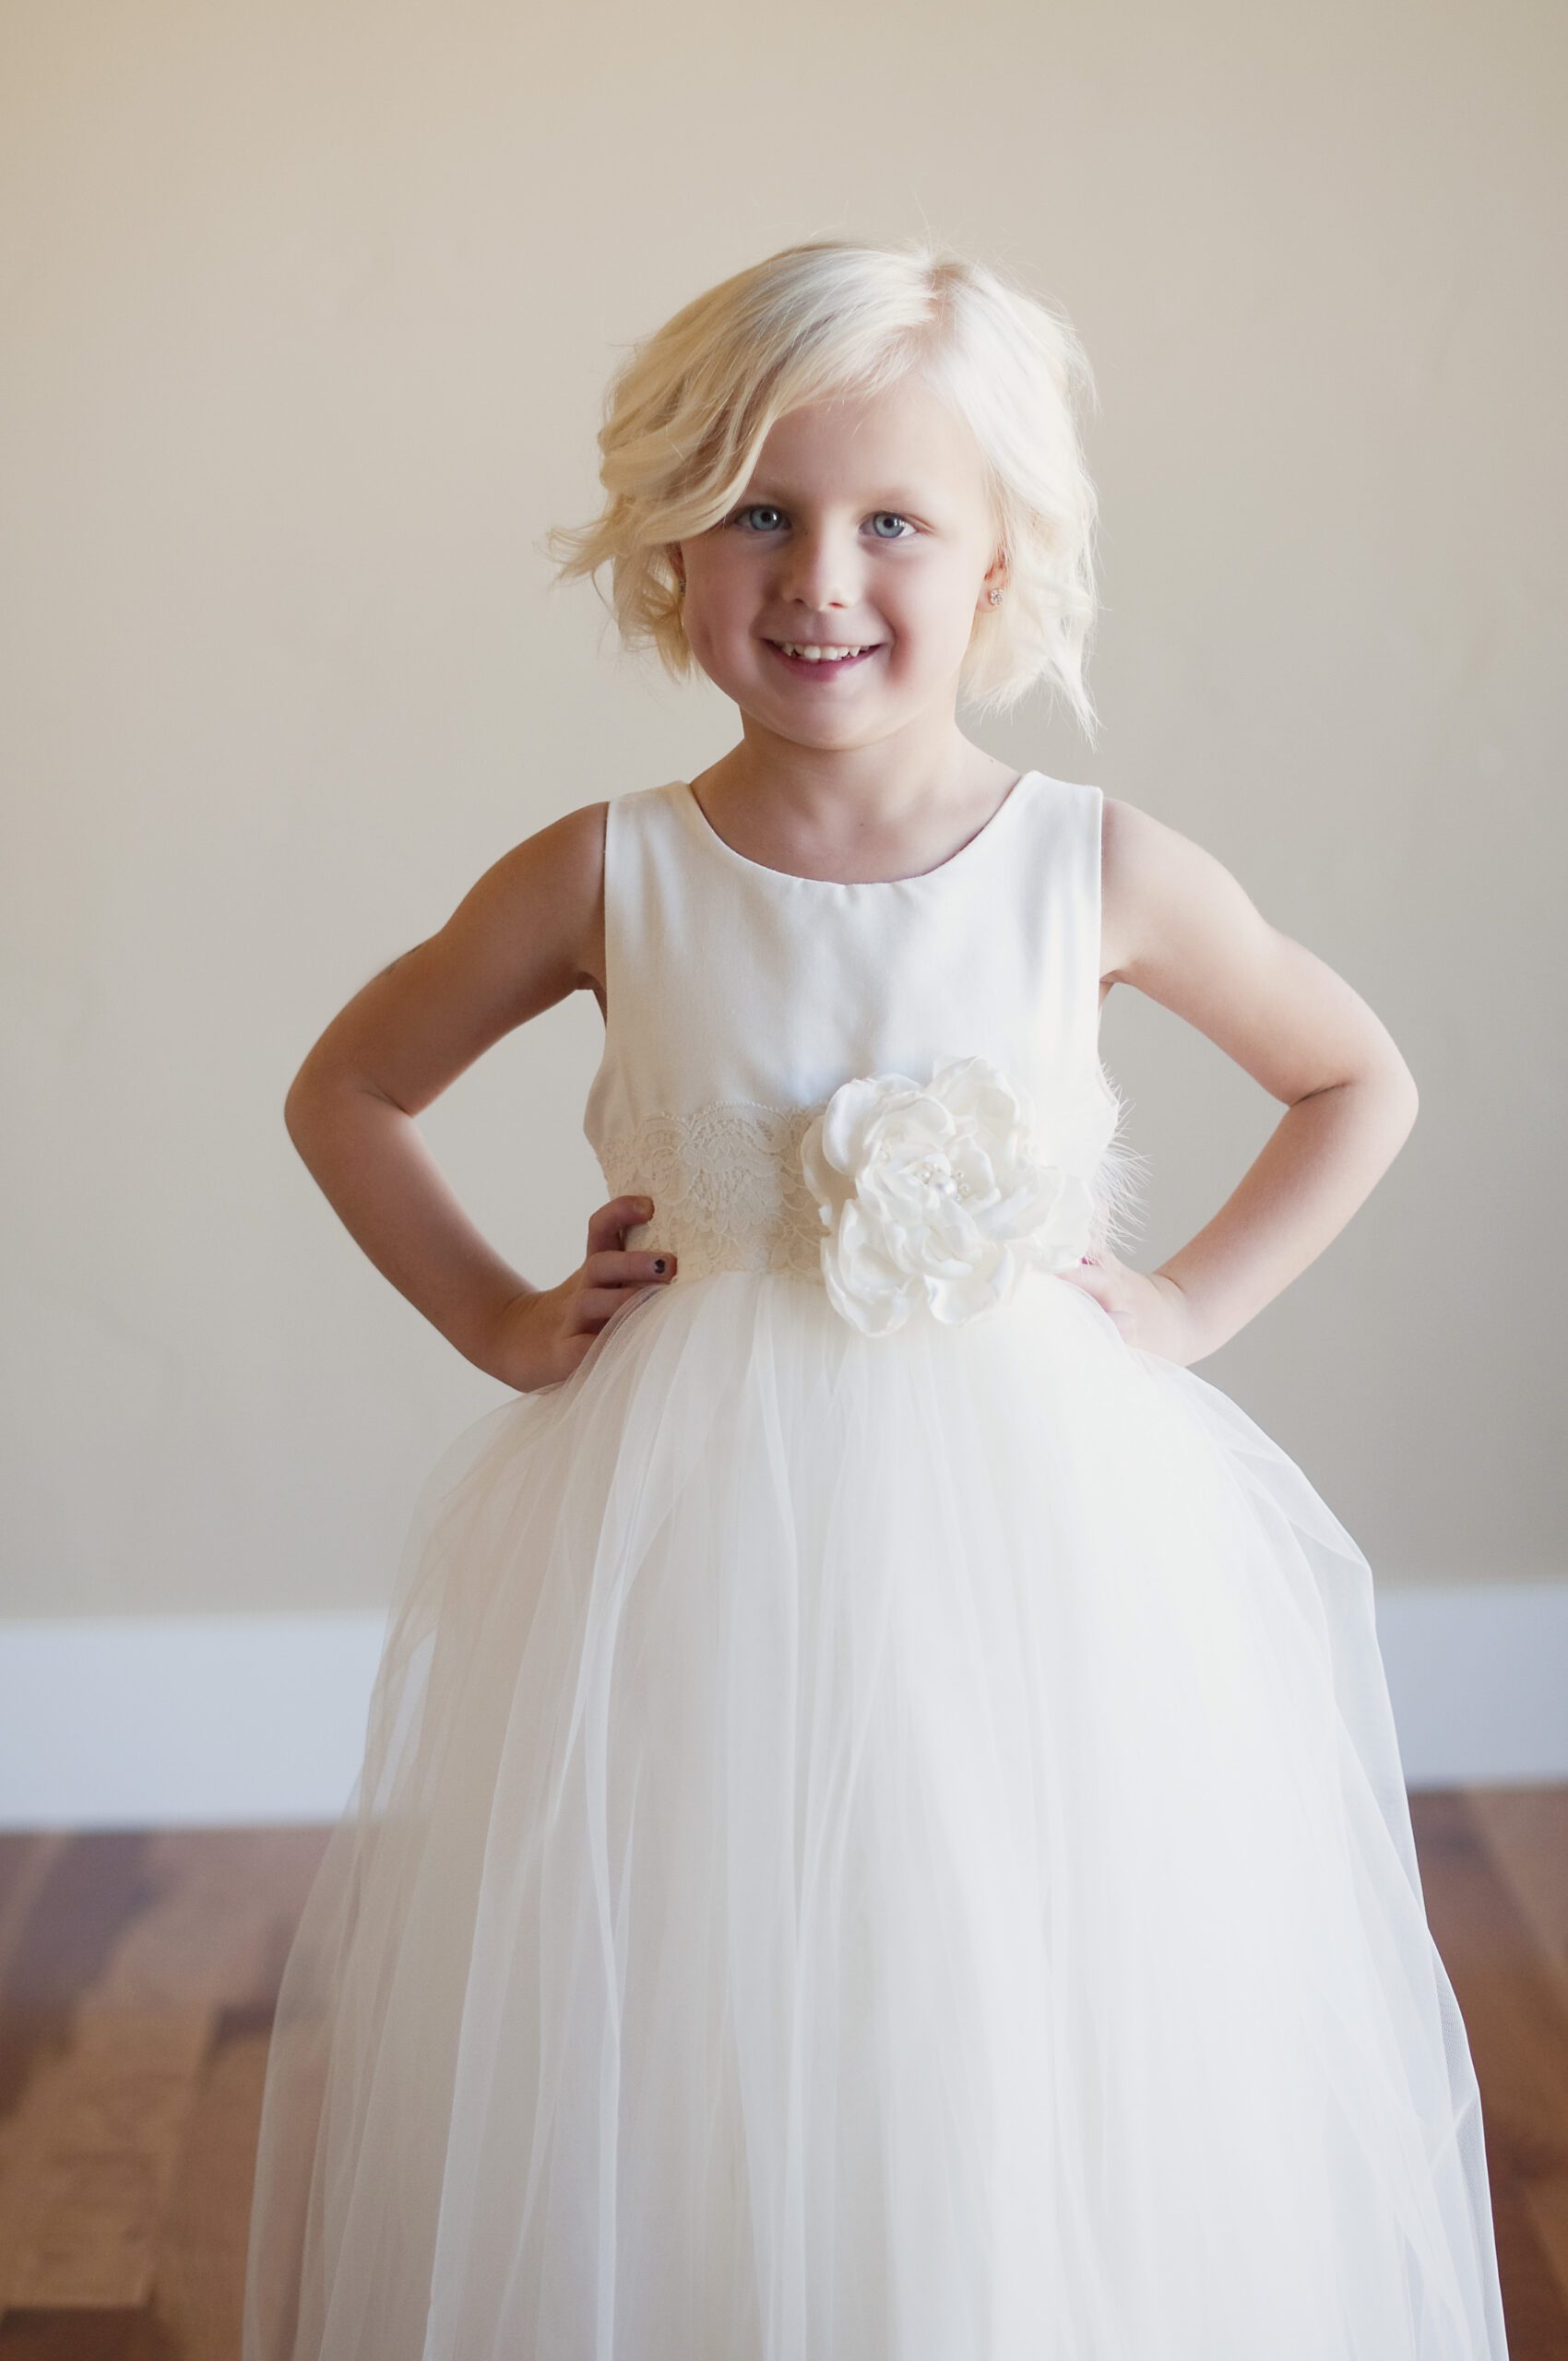 A photo of a 5 year old girl wearing an ivory flower girl dress with a tulle skirt for twirling